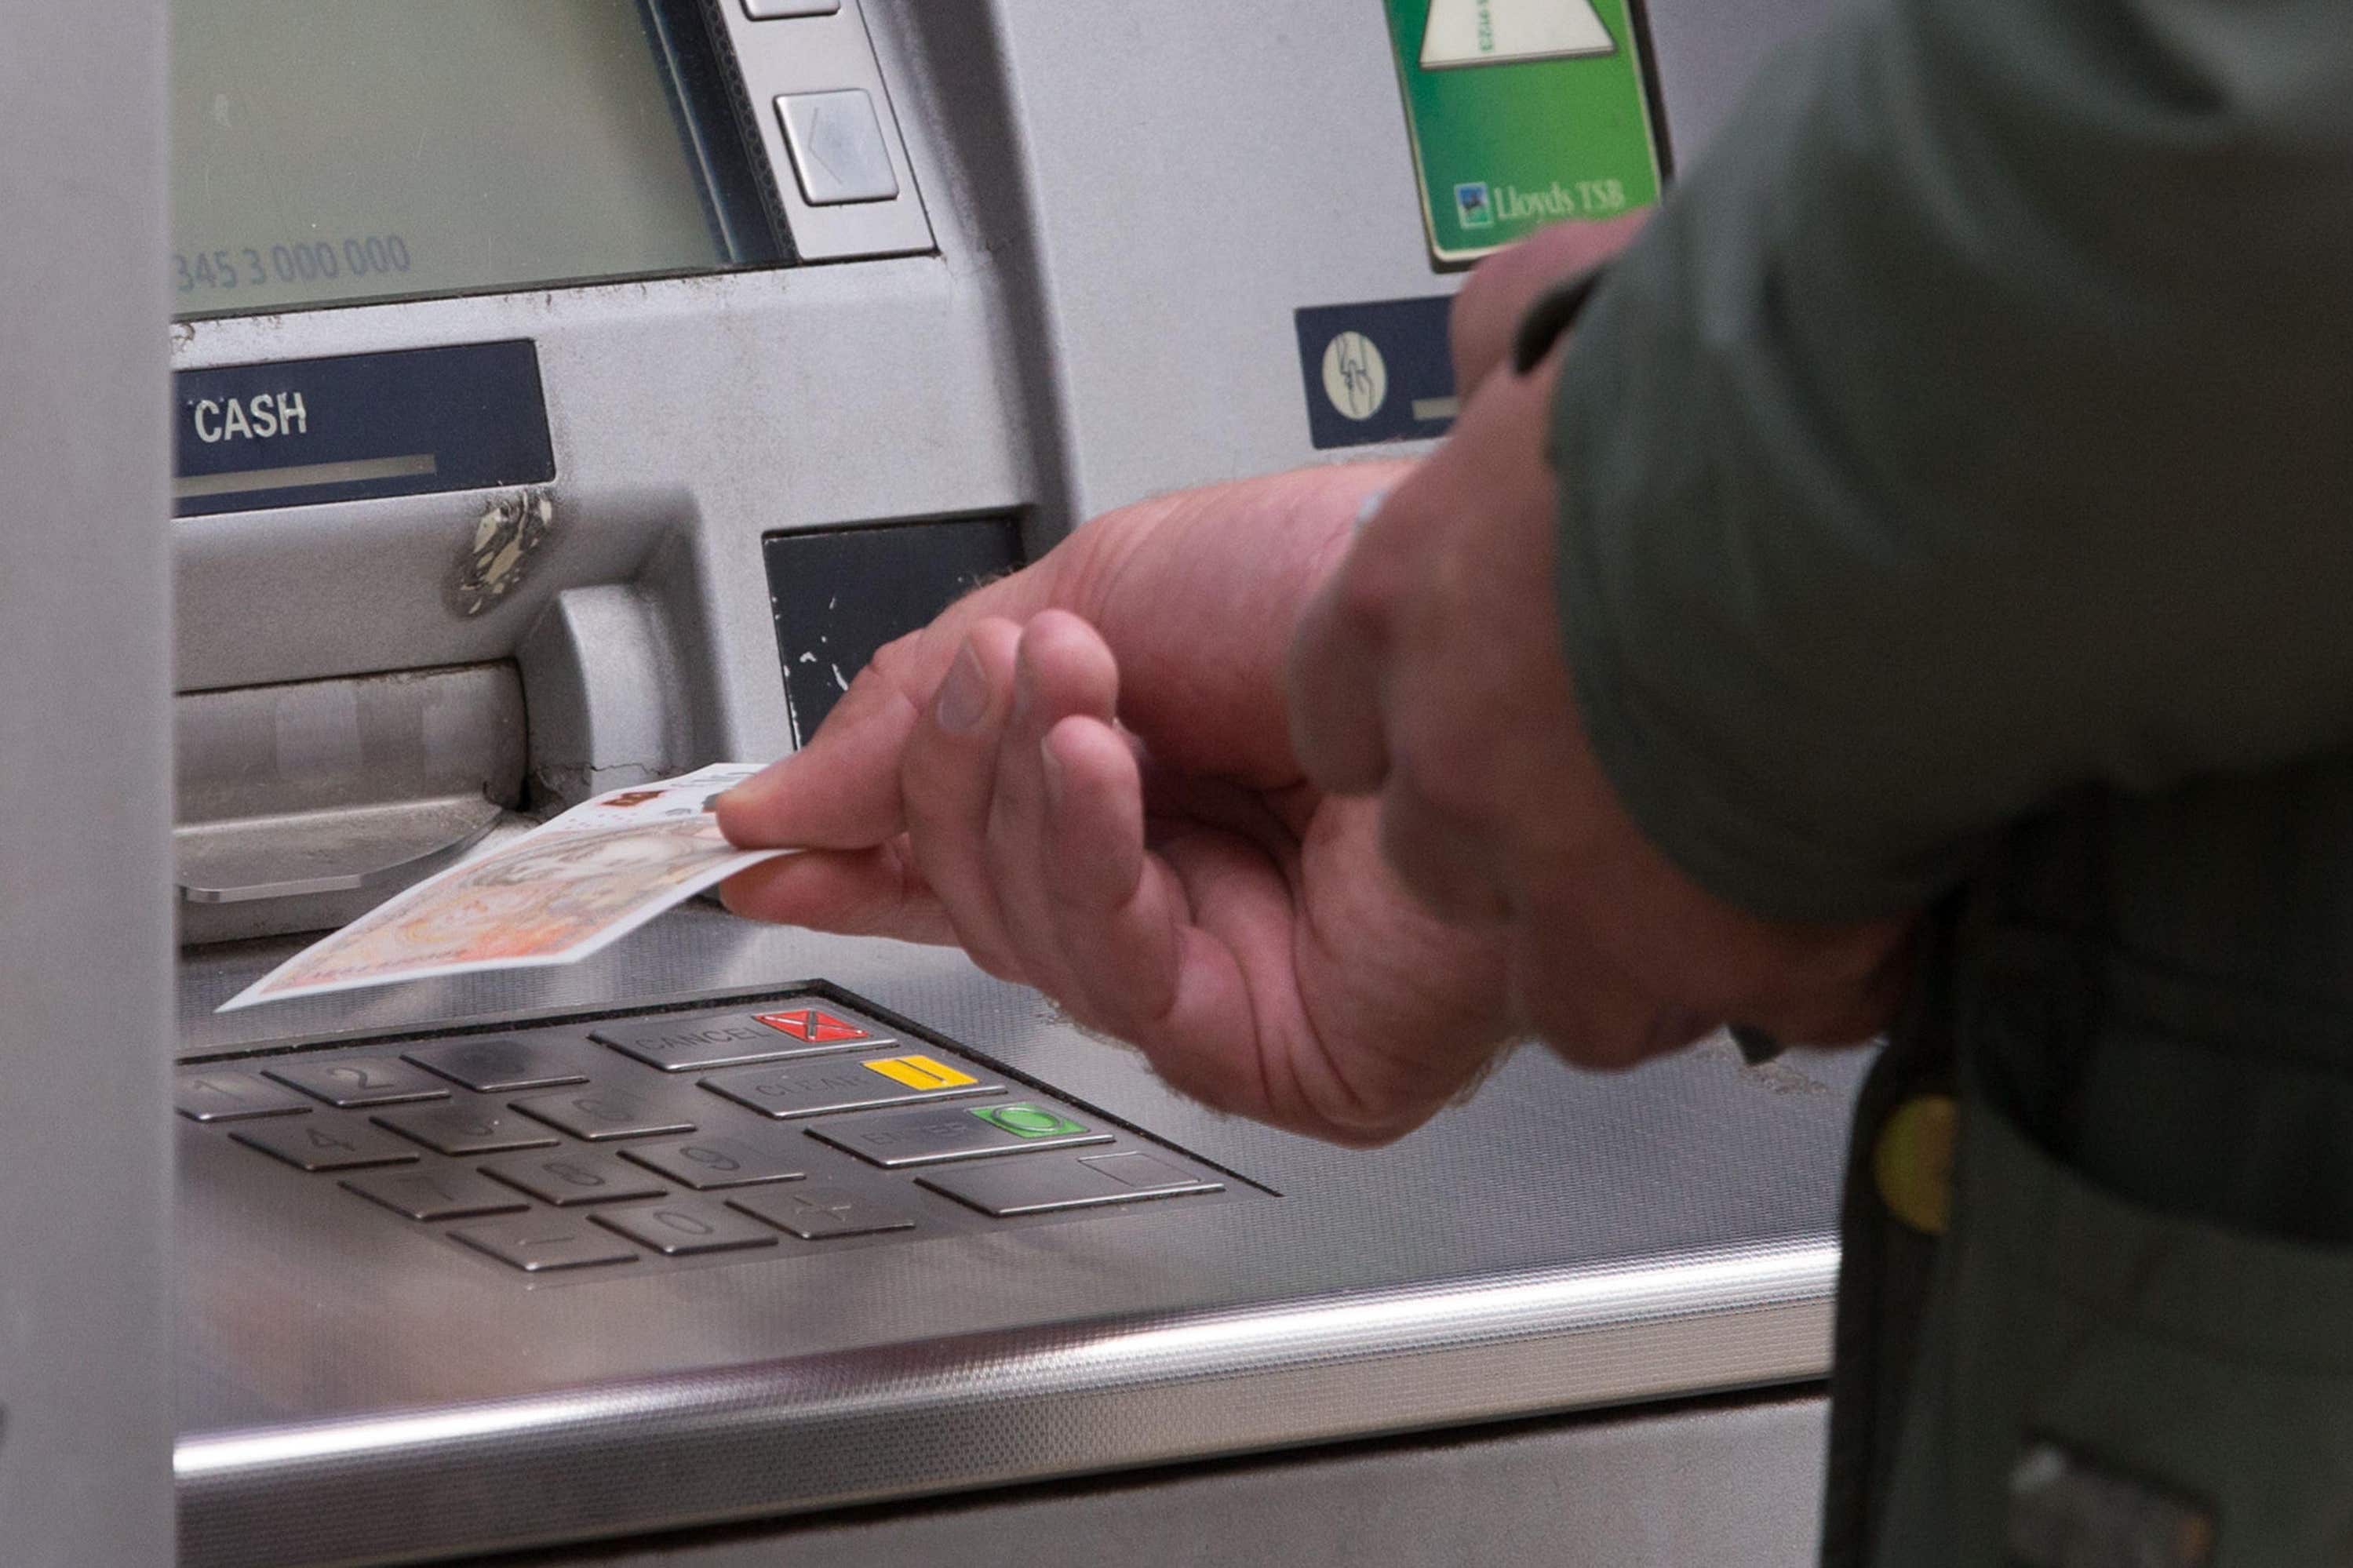 Many people are uncomfortable with digital banking, and for them cash will always be king